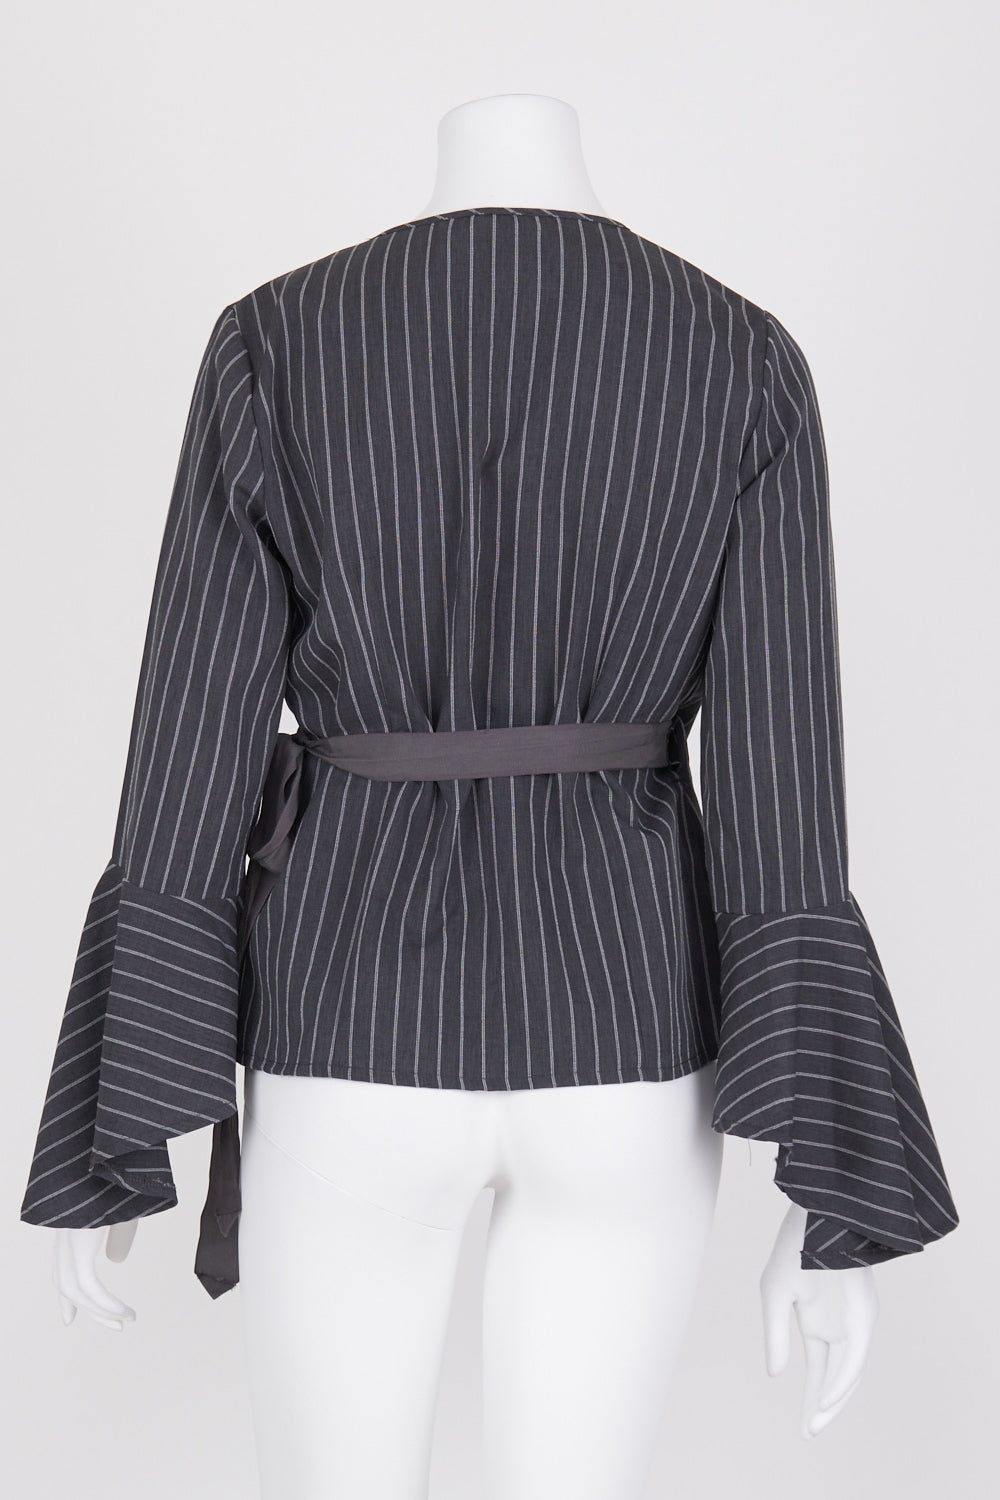 Bird Keepers Grey and White Striped Wrap Top 10